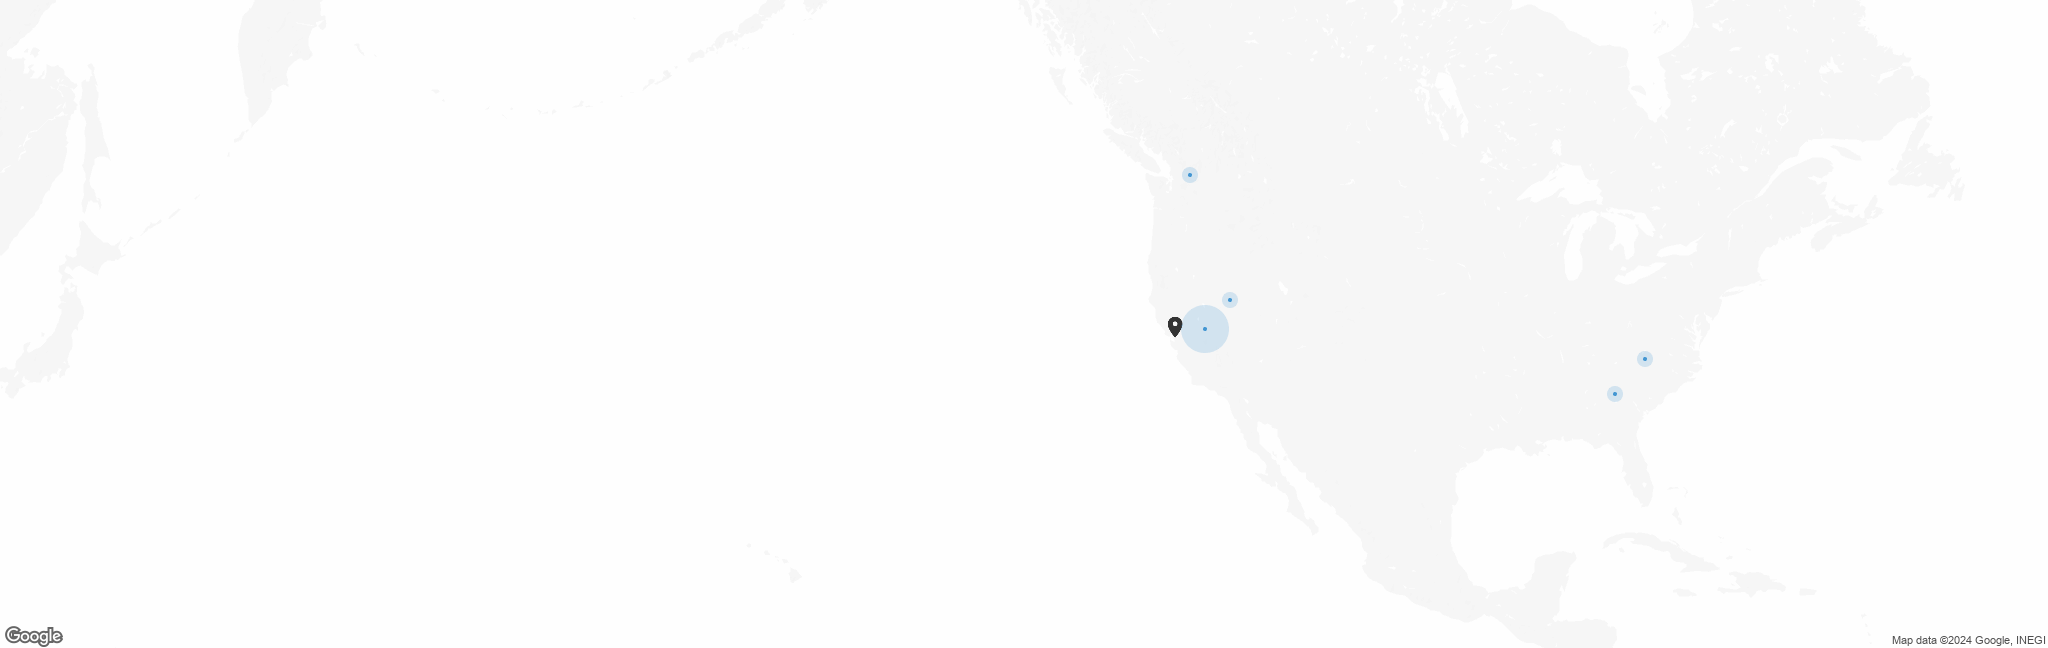 Map of US with pin of Forestr Org location